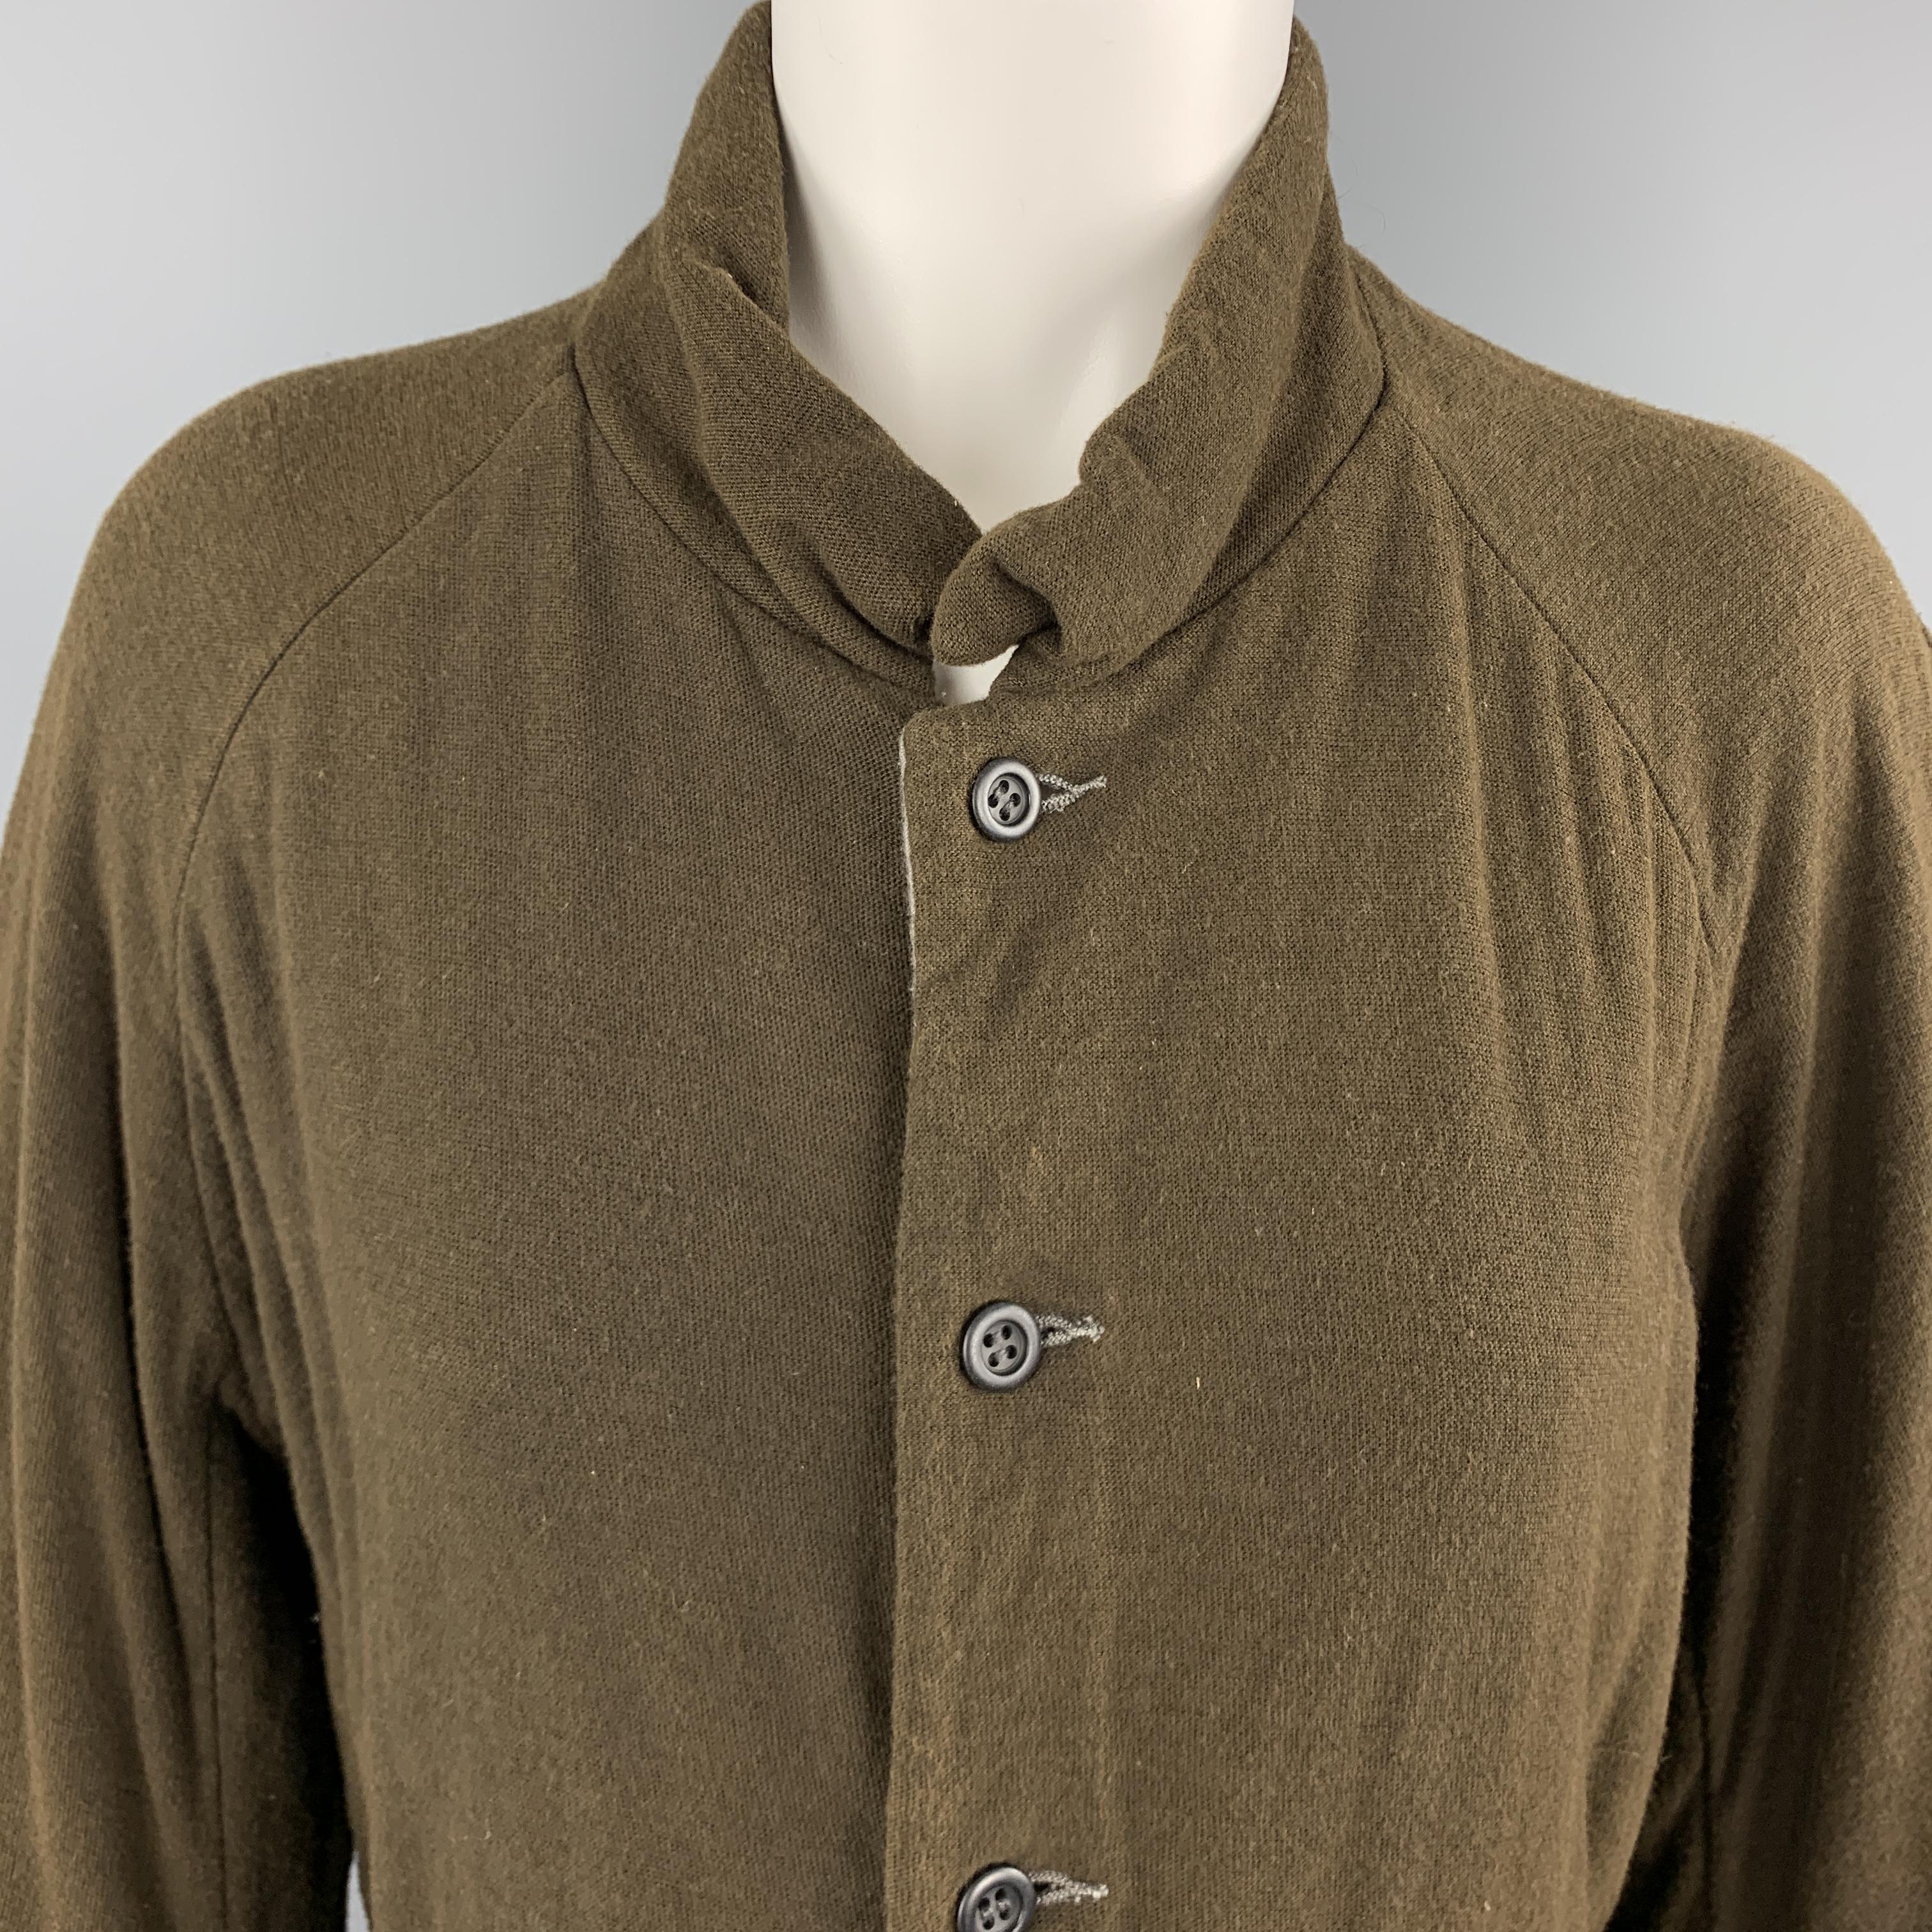 VOLGA VOLGA jacket comes in textured olive jersey with a band collar, button up front, slit pockets, and gray reverse side. Made in Tokyo.

Excellent Pre-Owned Condition.
Marked: S

Measurements:

Shoulder: 18 in.
Bust: 40 in.
Sleeve: 25 in.
Length: